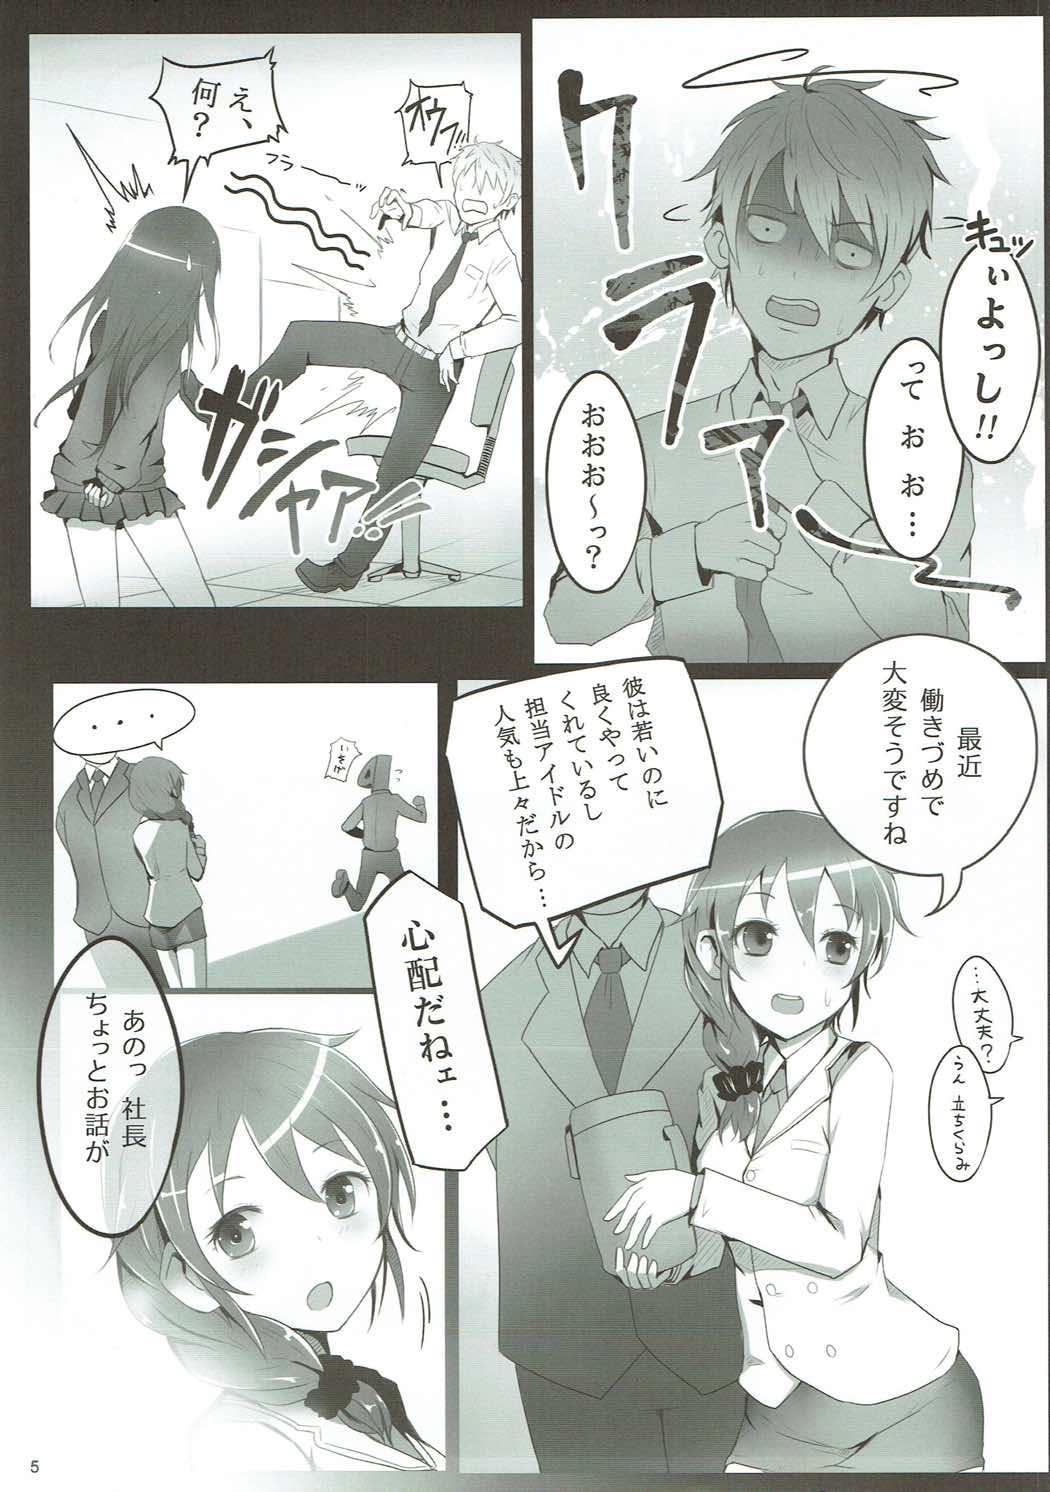 Fat ONE ROOM ASSISTANT!! - The idolmaster Hardon - Page 4